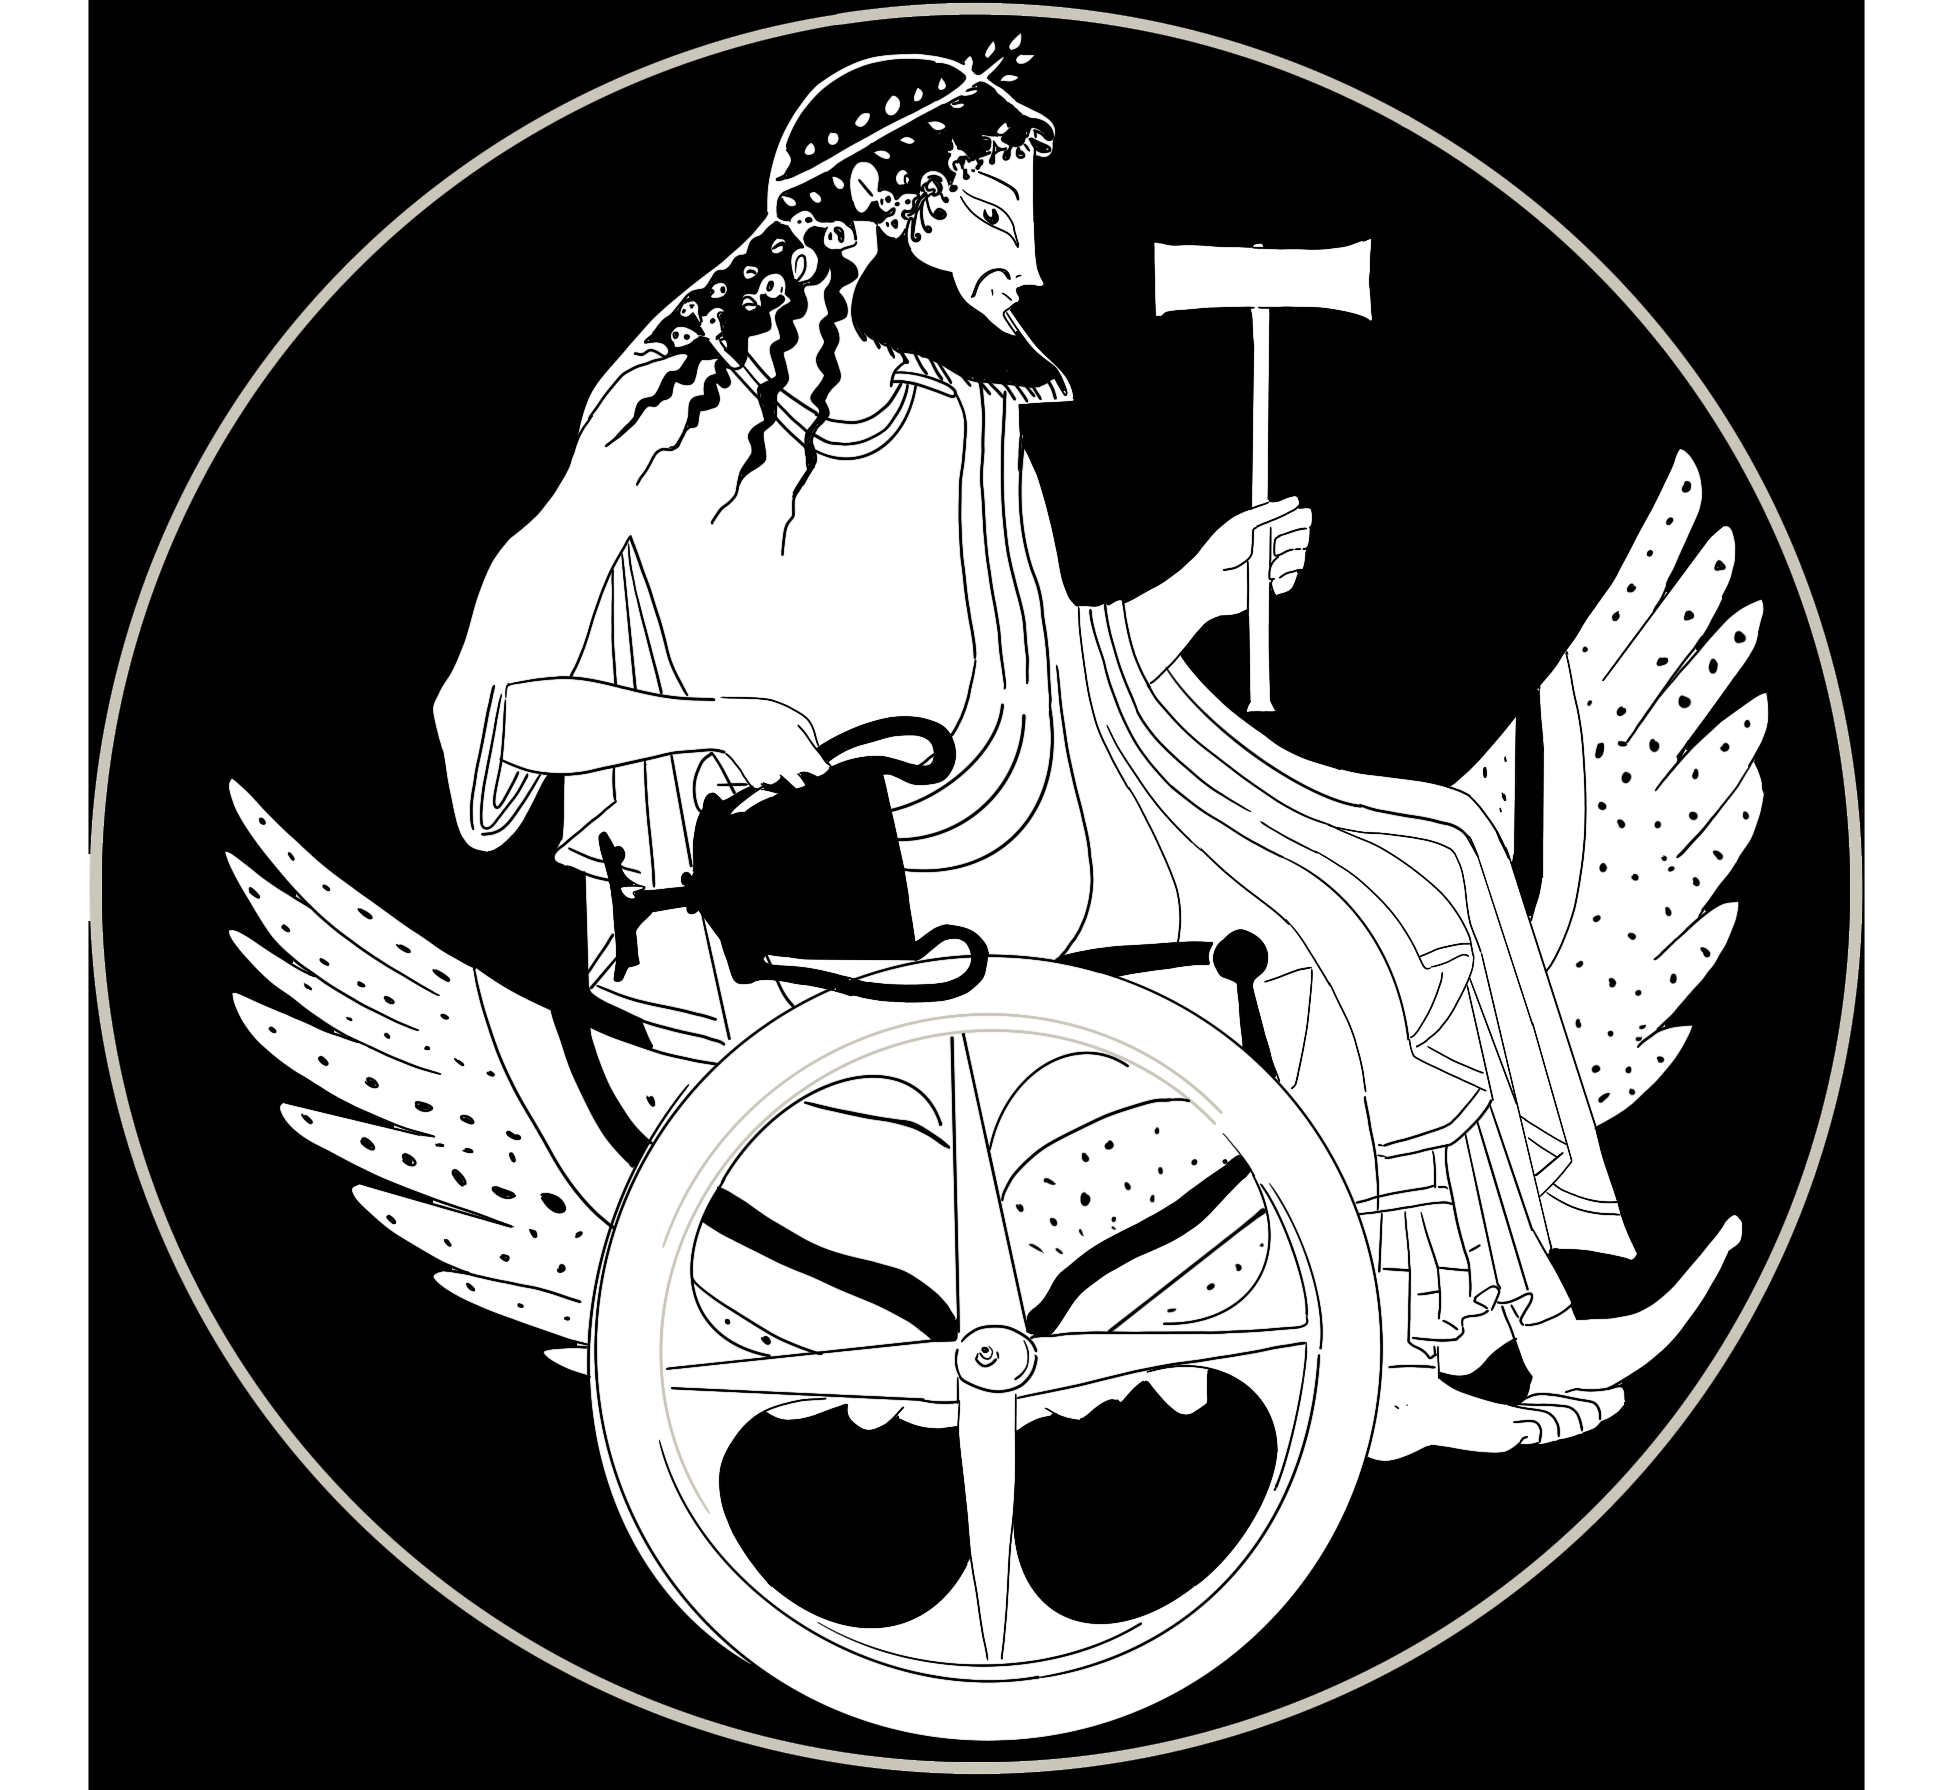 Hephaestus, bearded and wearing a laurel crown and toga, sits in a winged two-wheel chariot. He holds a cup in one hand and a hammer in the other.